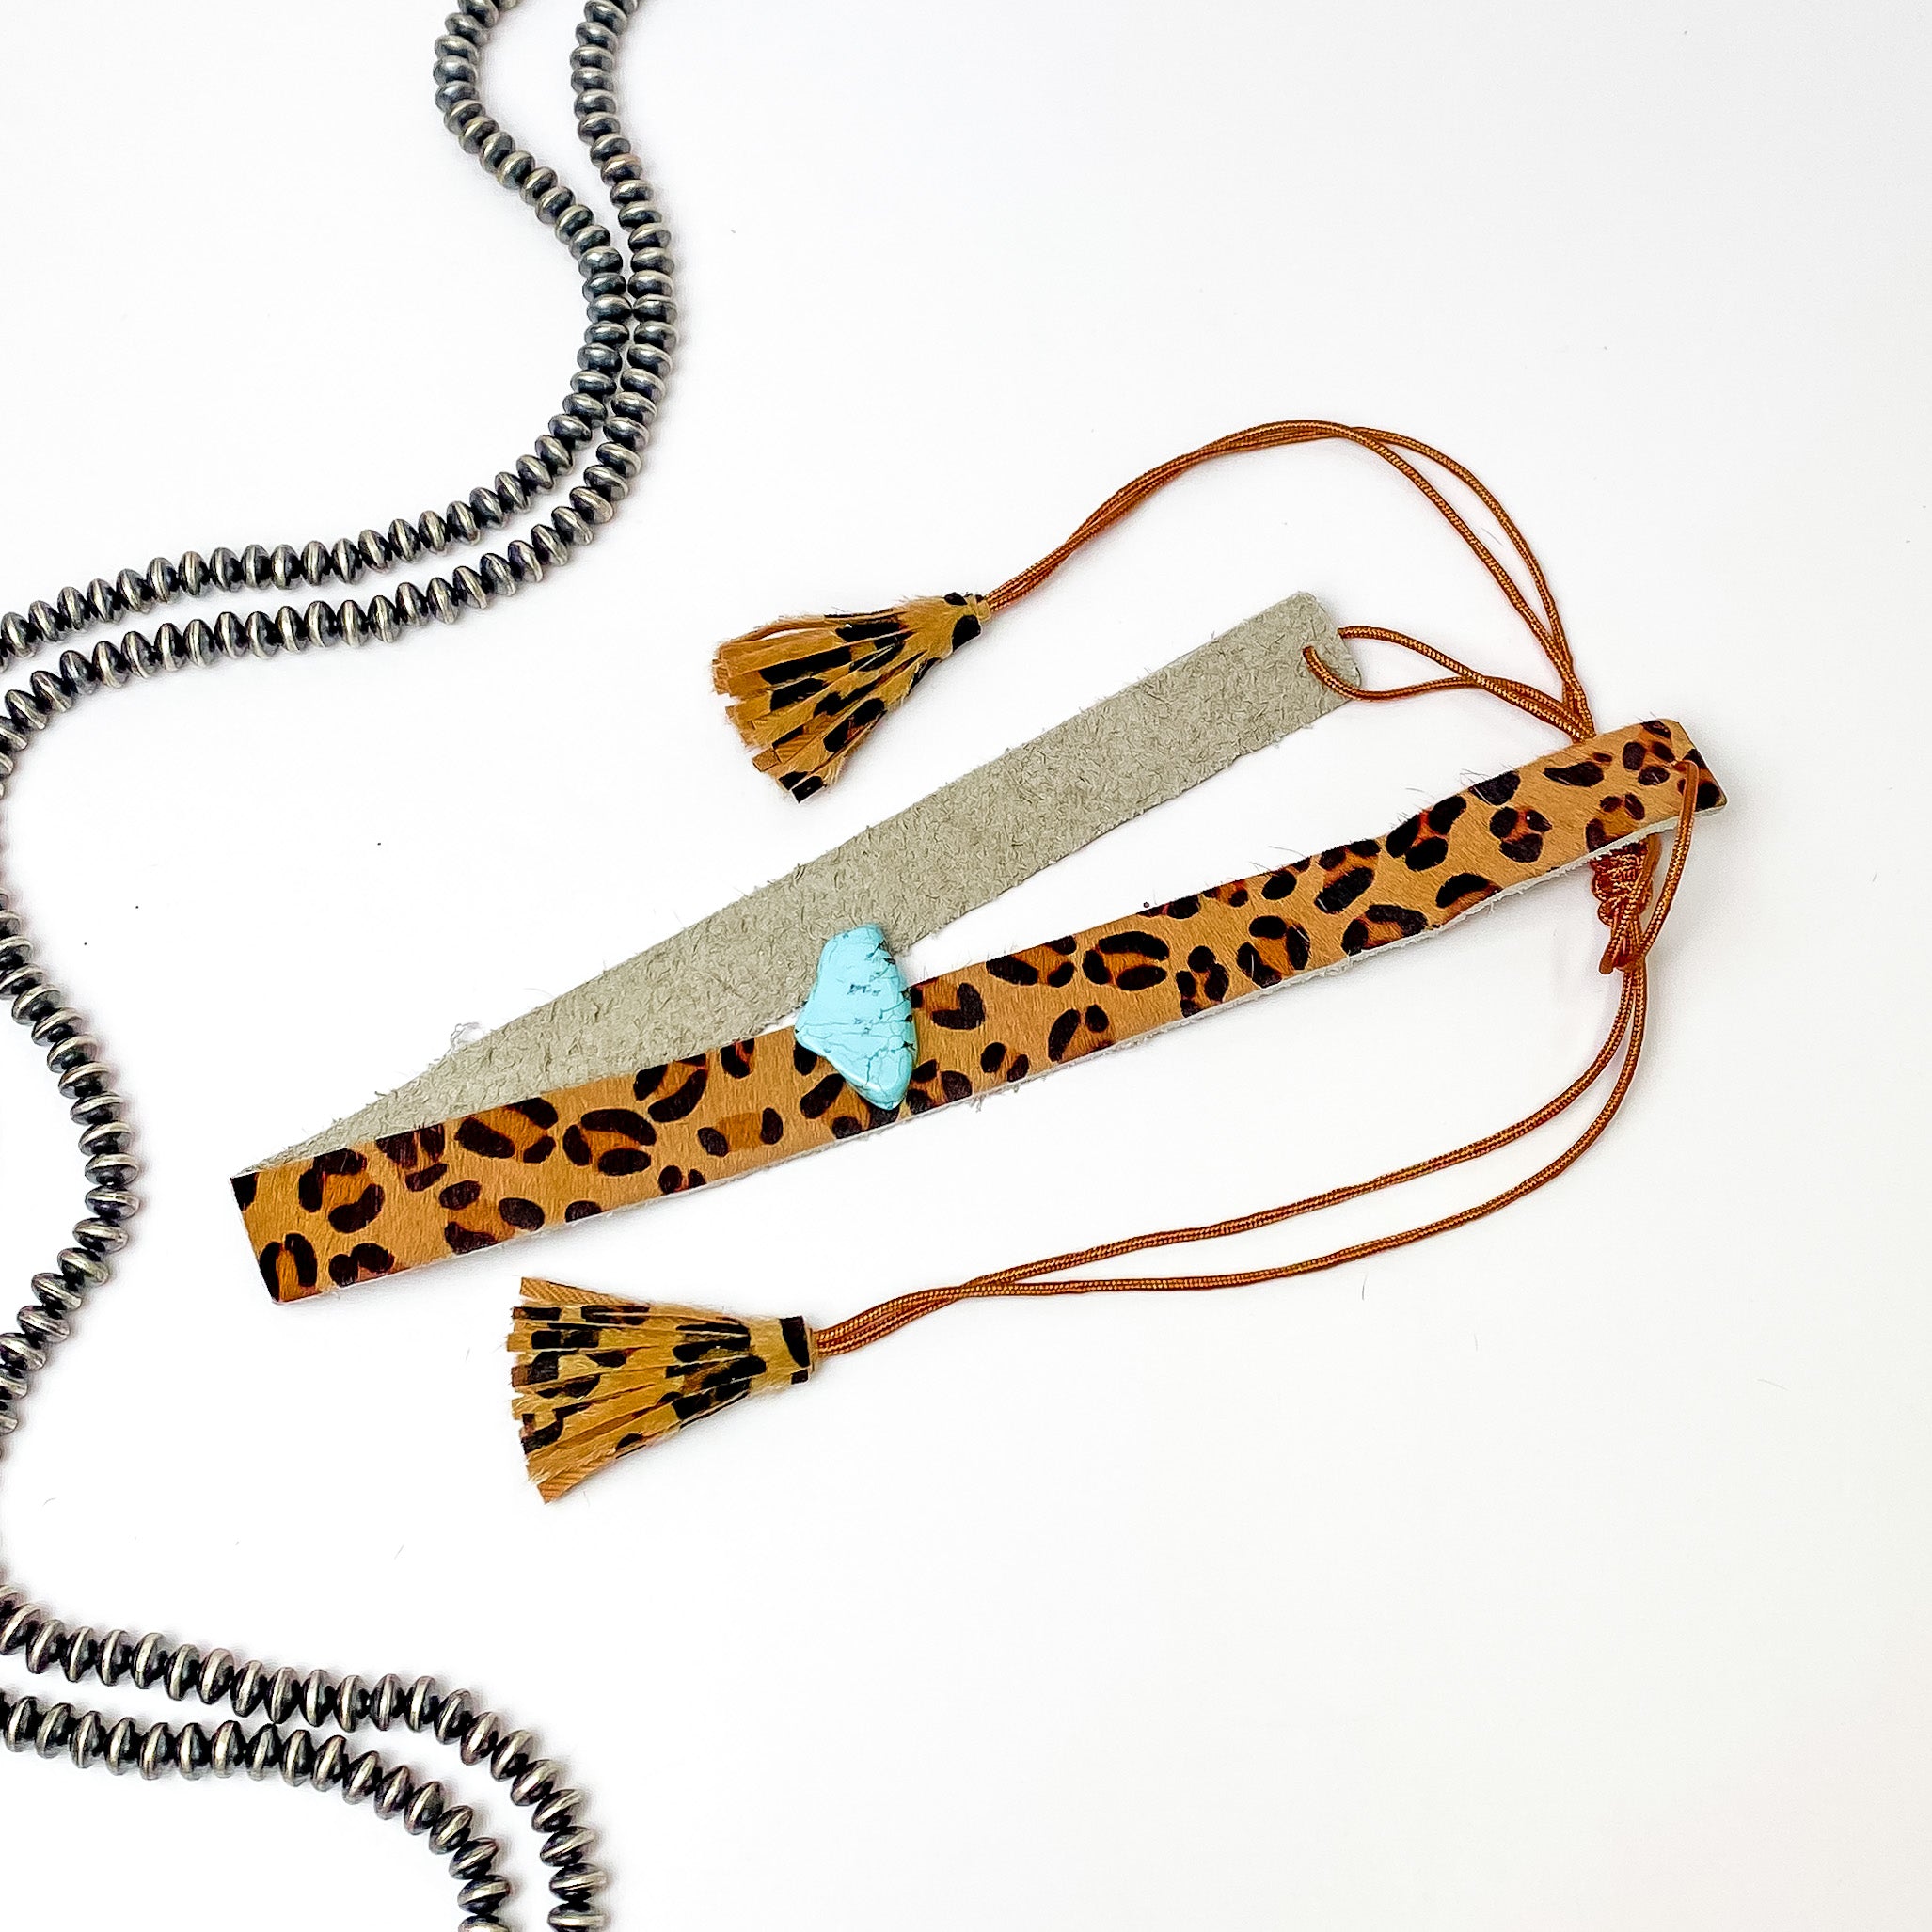 Pictured is a leopard print, adjustable hat band with a turquoise stone. This hat band is pictured on a white background with silver, saucer beads on the left side of the hat band. 